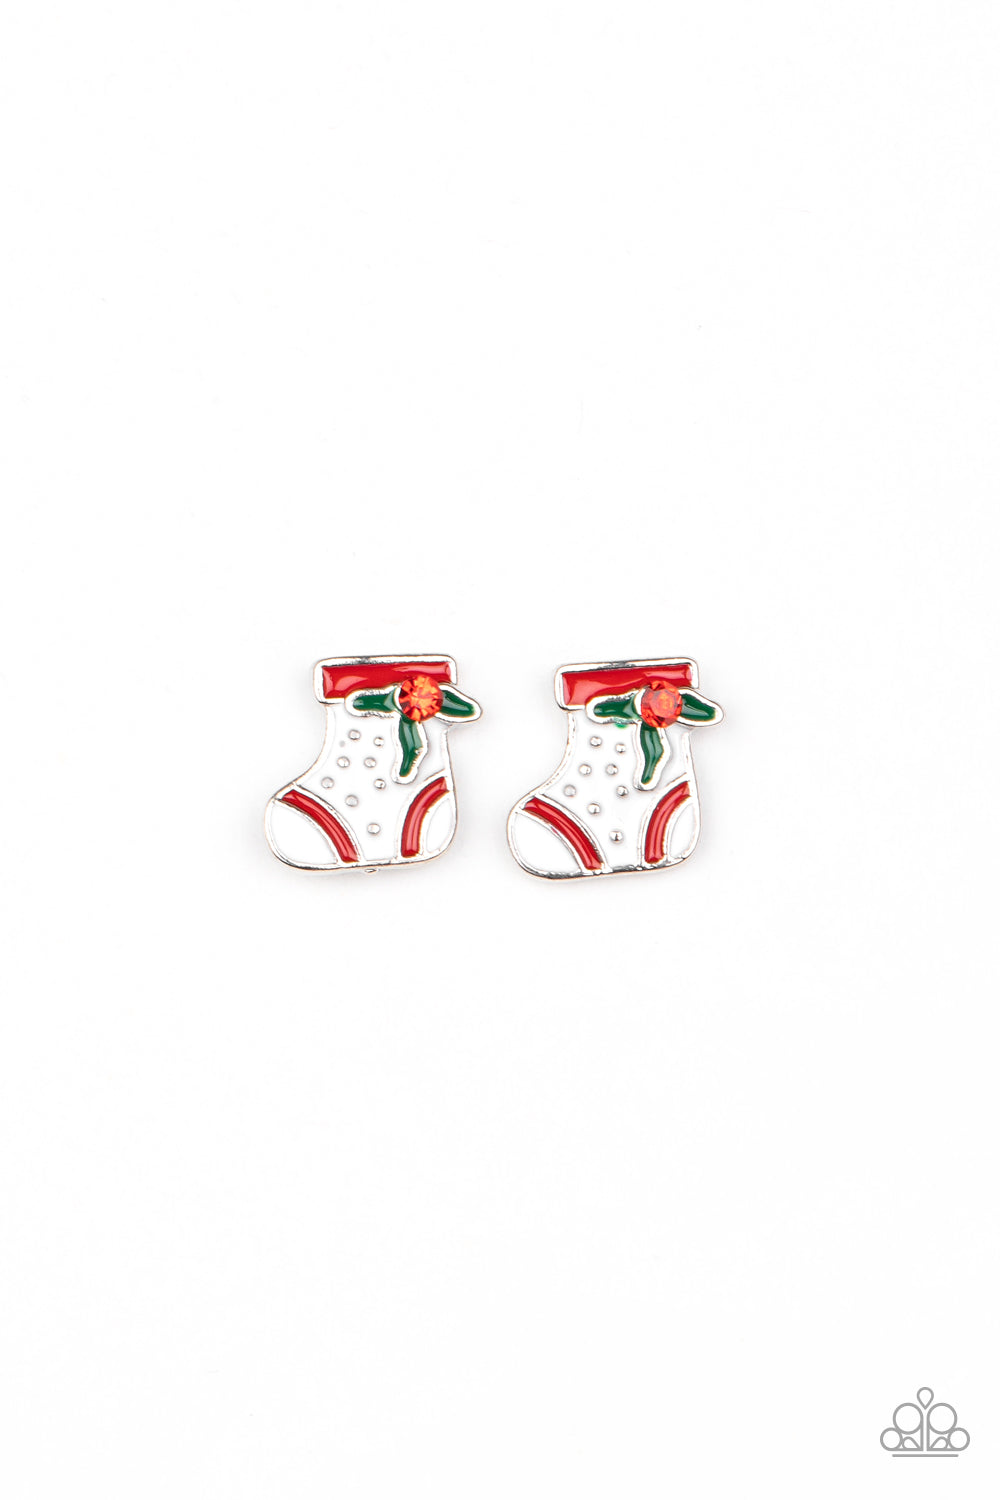 SANTA'S ON THE WAY - ASSORTED SET OF 5 PAIRS OF EARRINGS